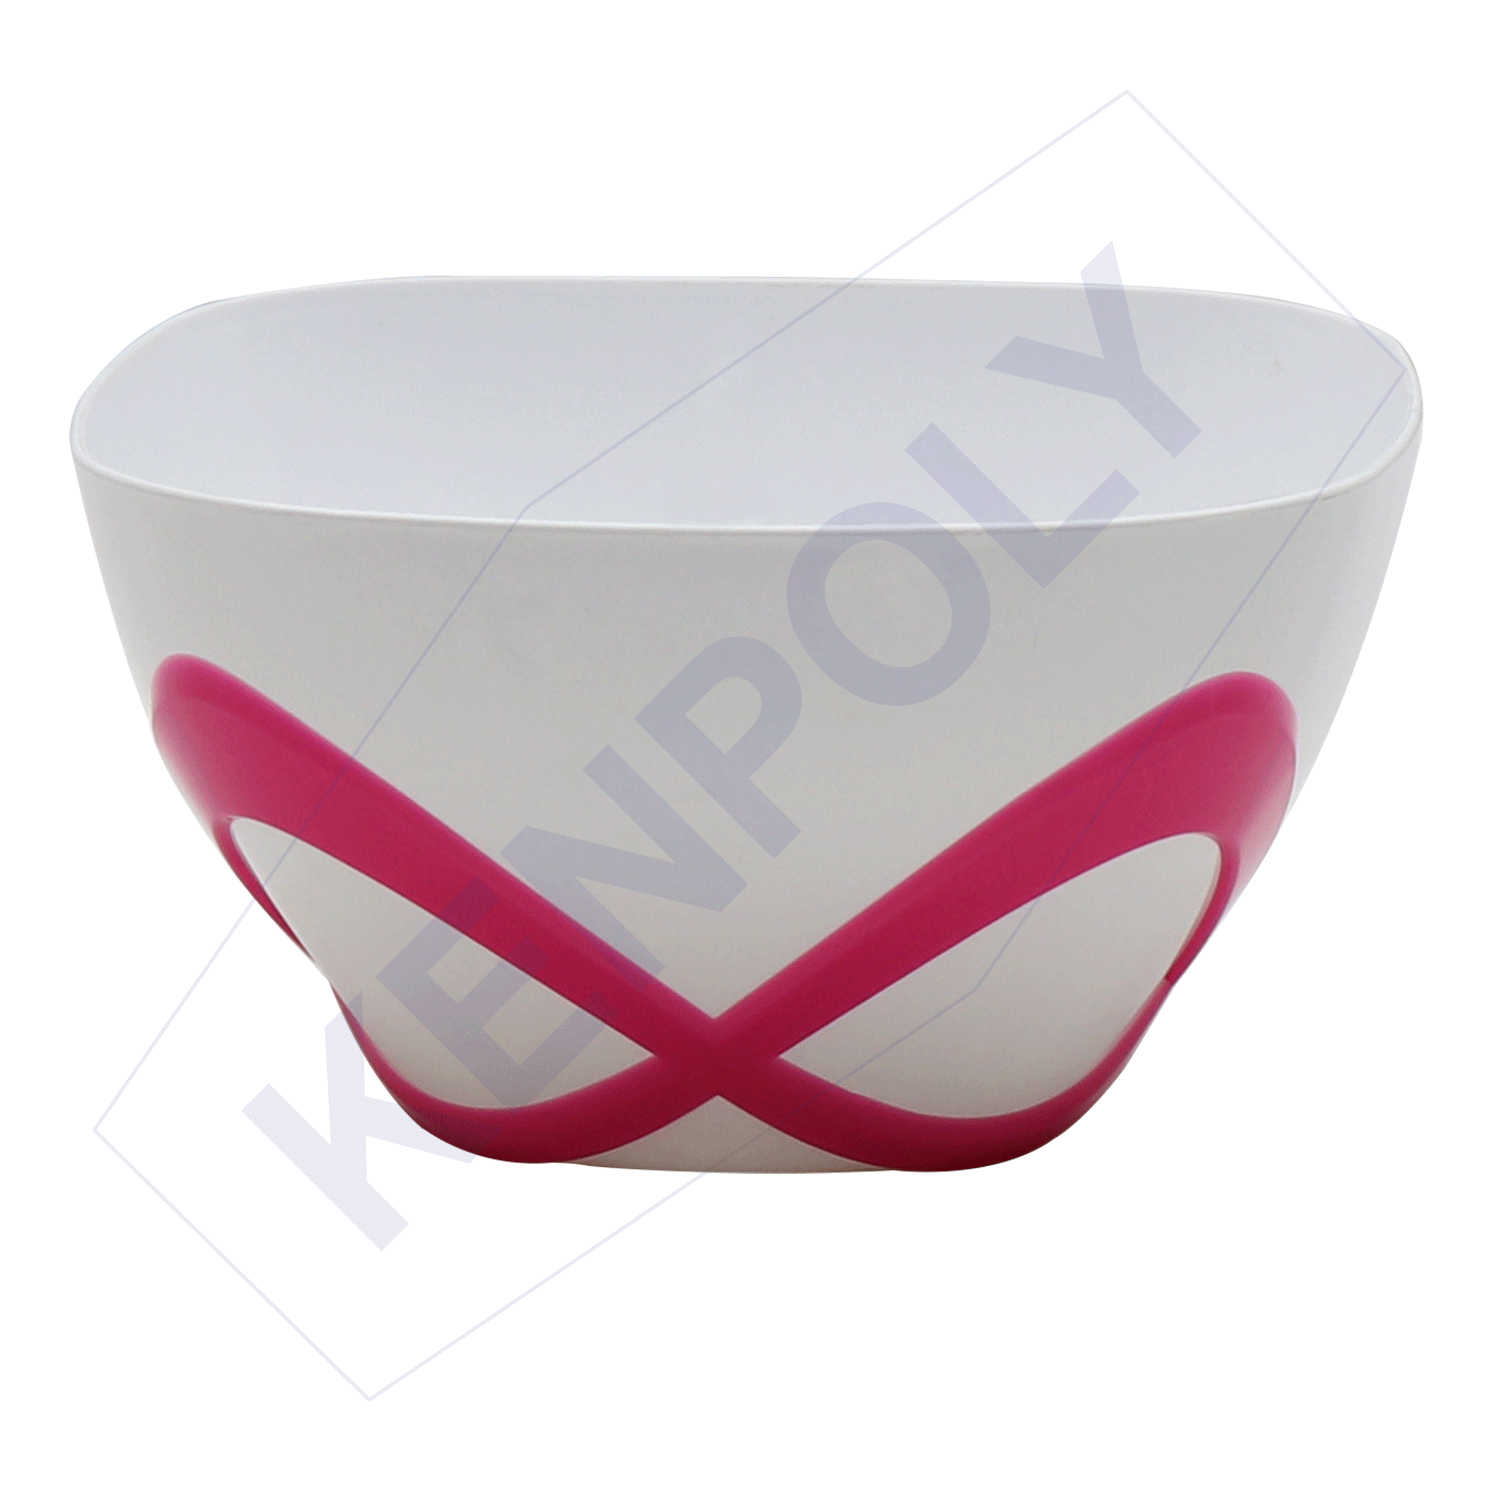 Smiley 20 Bucket without Lid  Kenpoly Manufacturers Limited